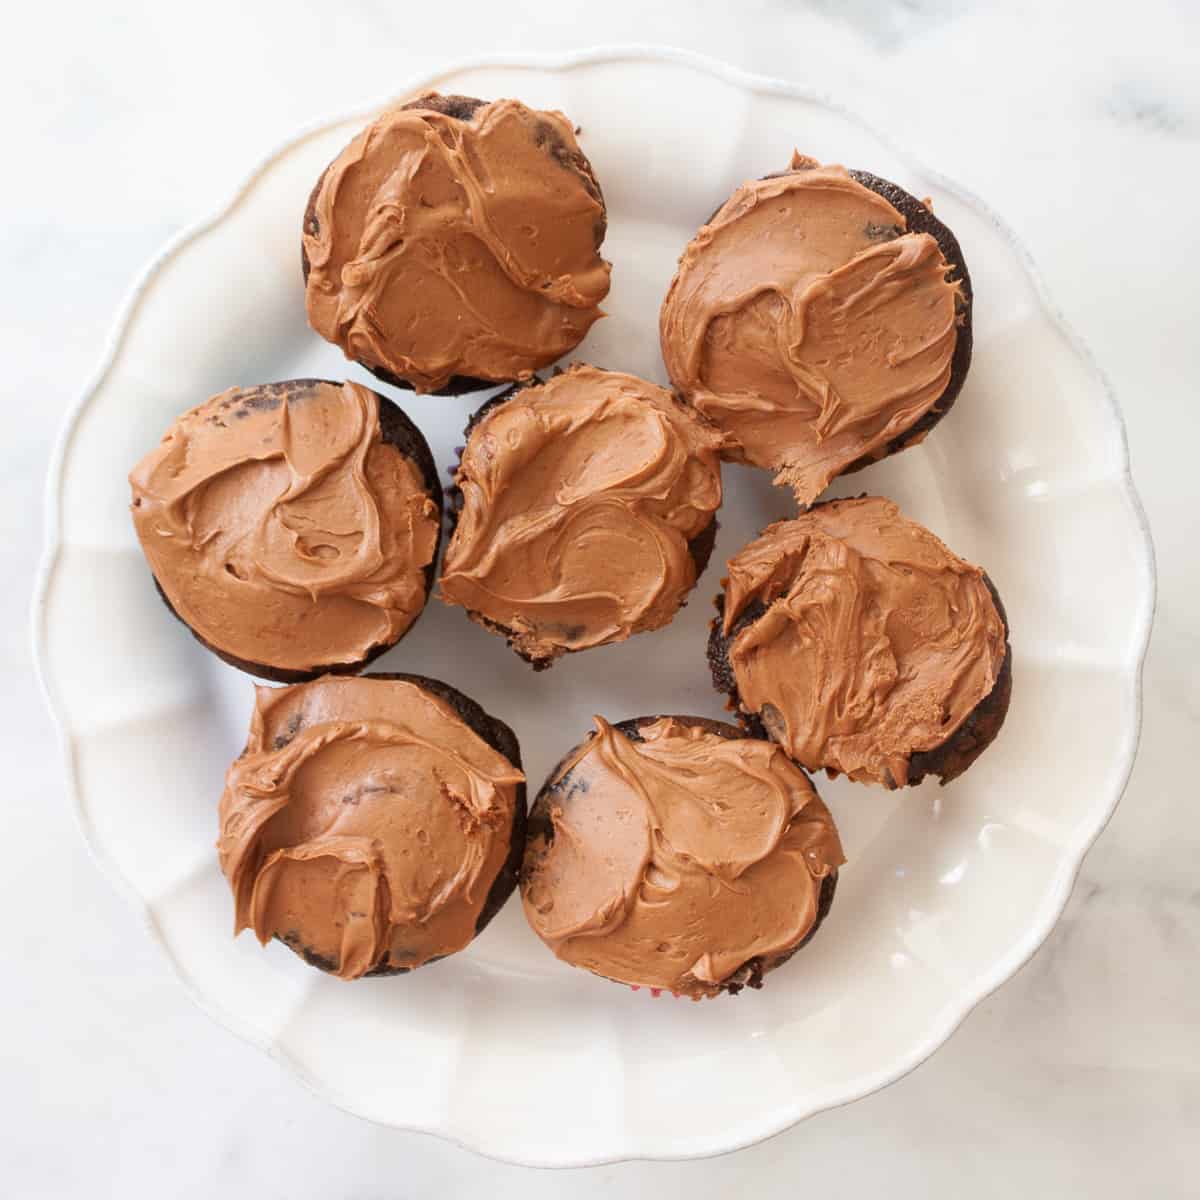 Gluten free chocolate cupcakes are arranged on a serving stand.